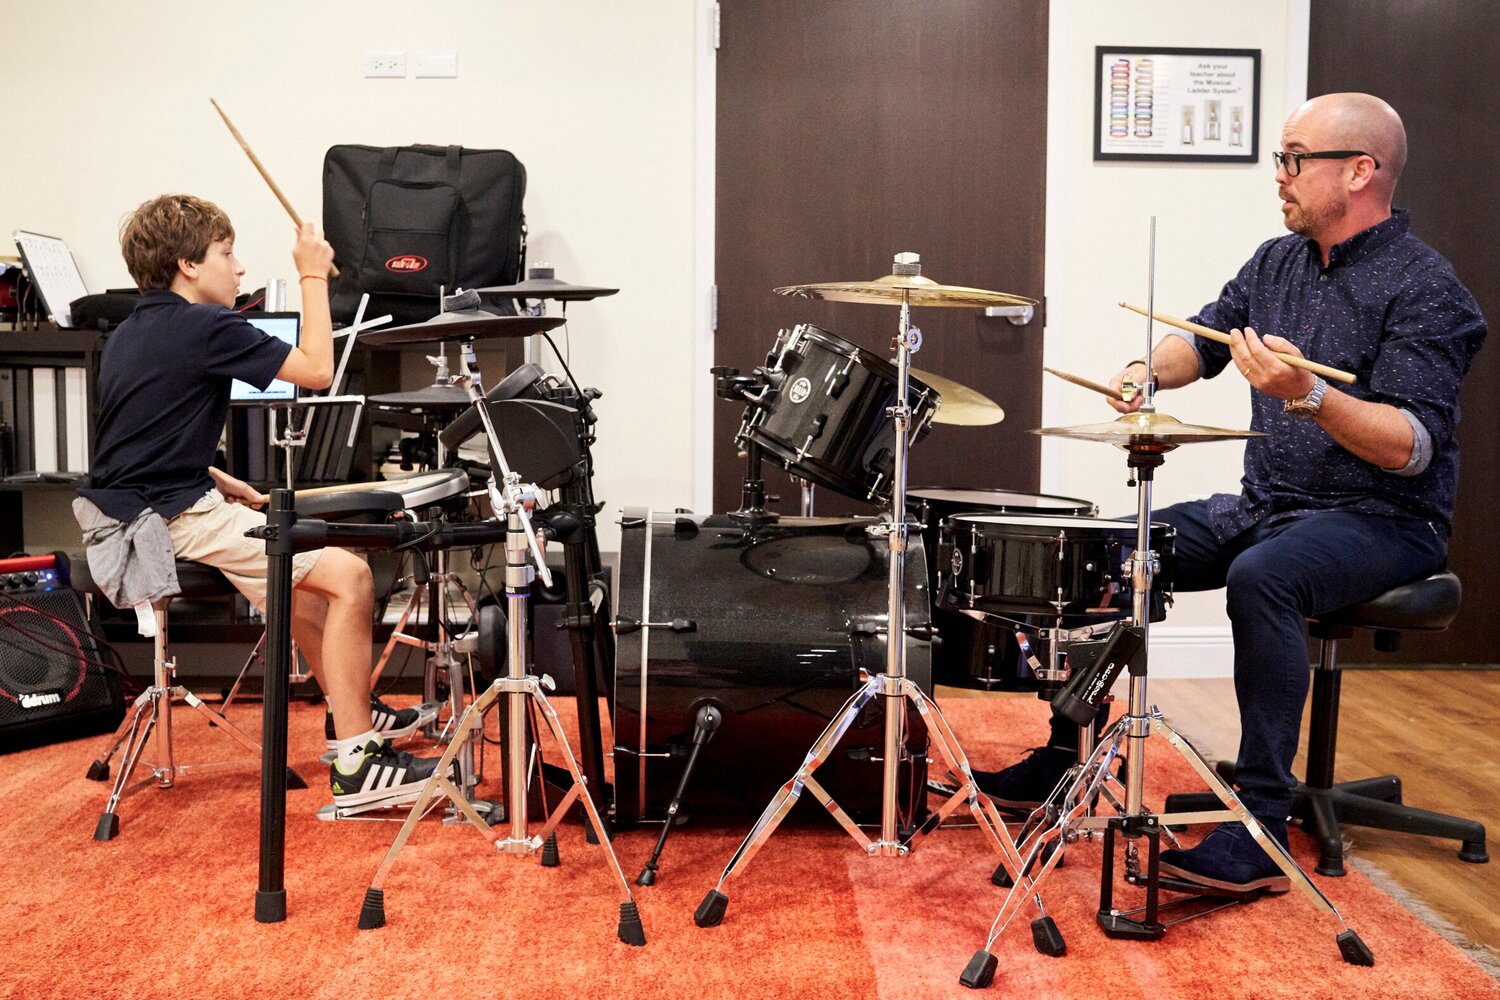 instructor teaching student drums